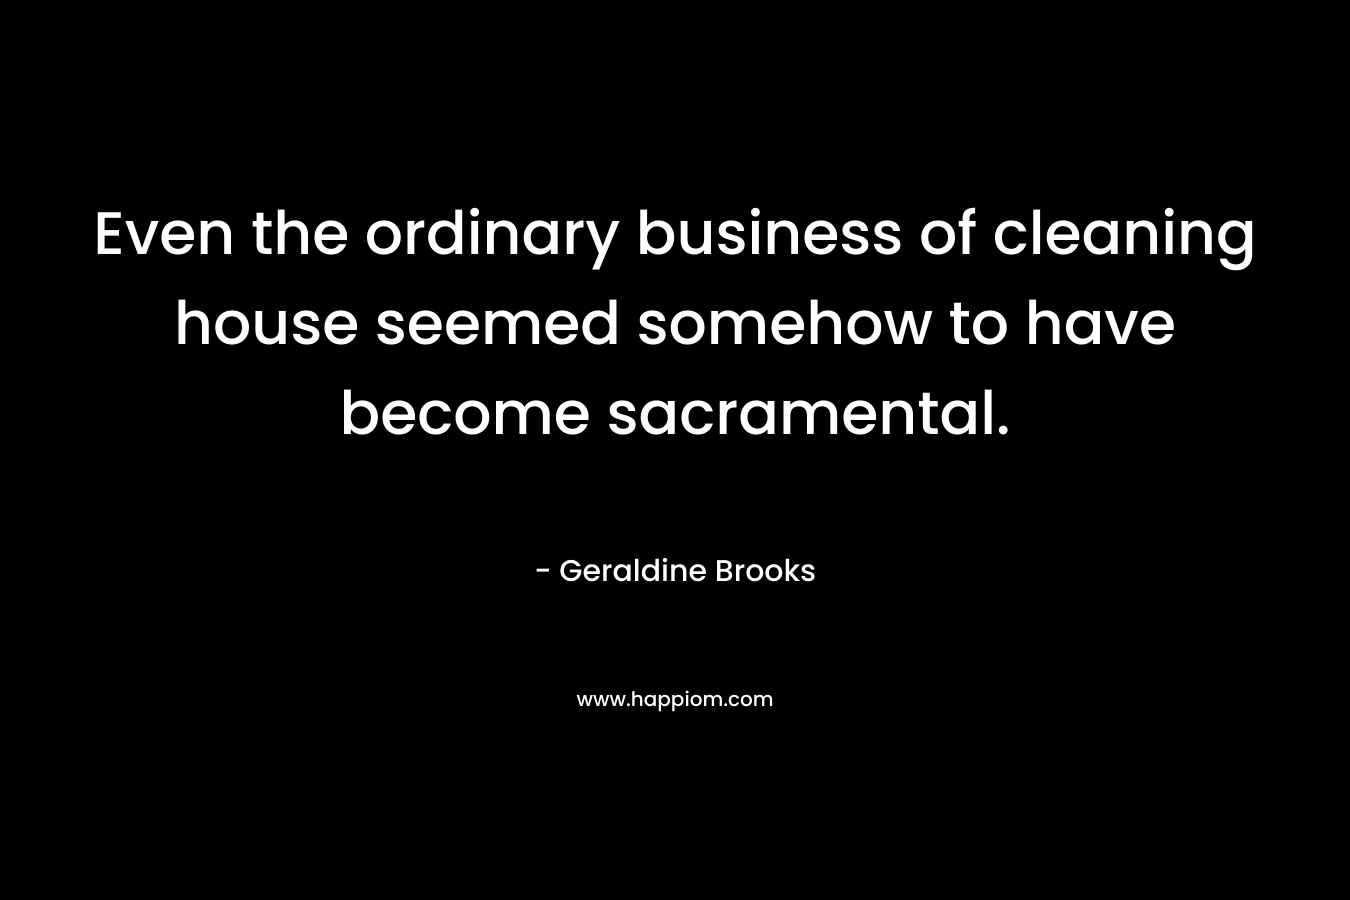 Even the ordinary business of cleaning house seemed somehow to have become sacramental.